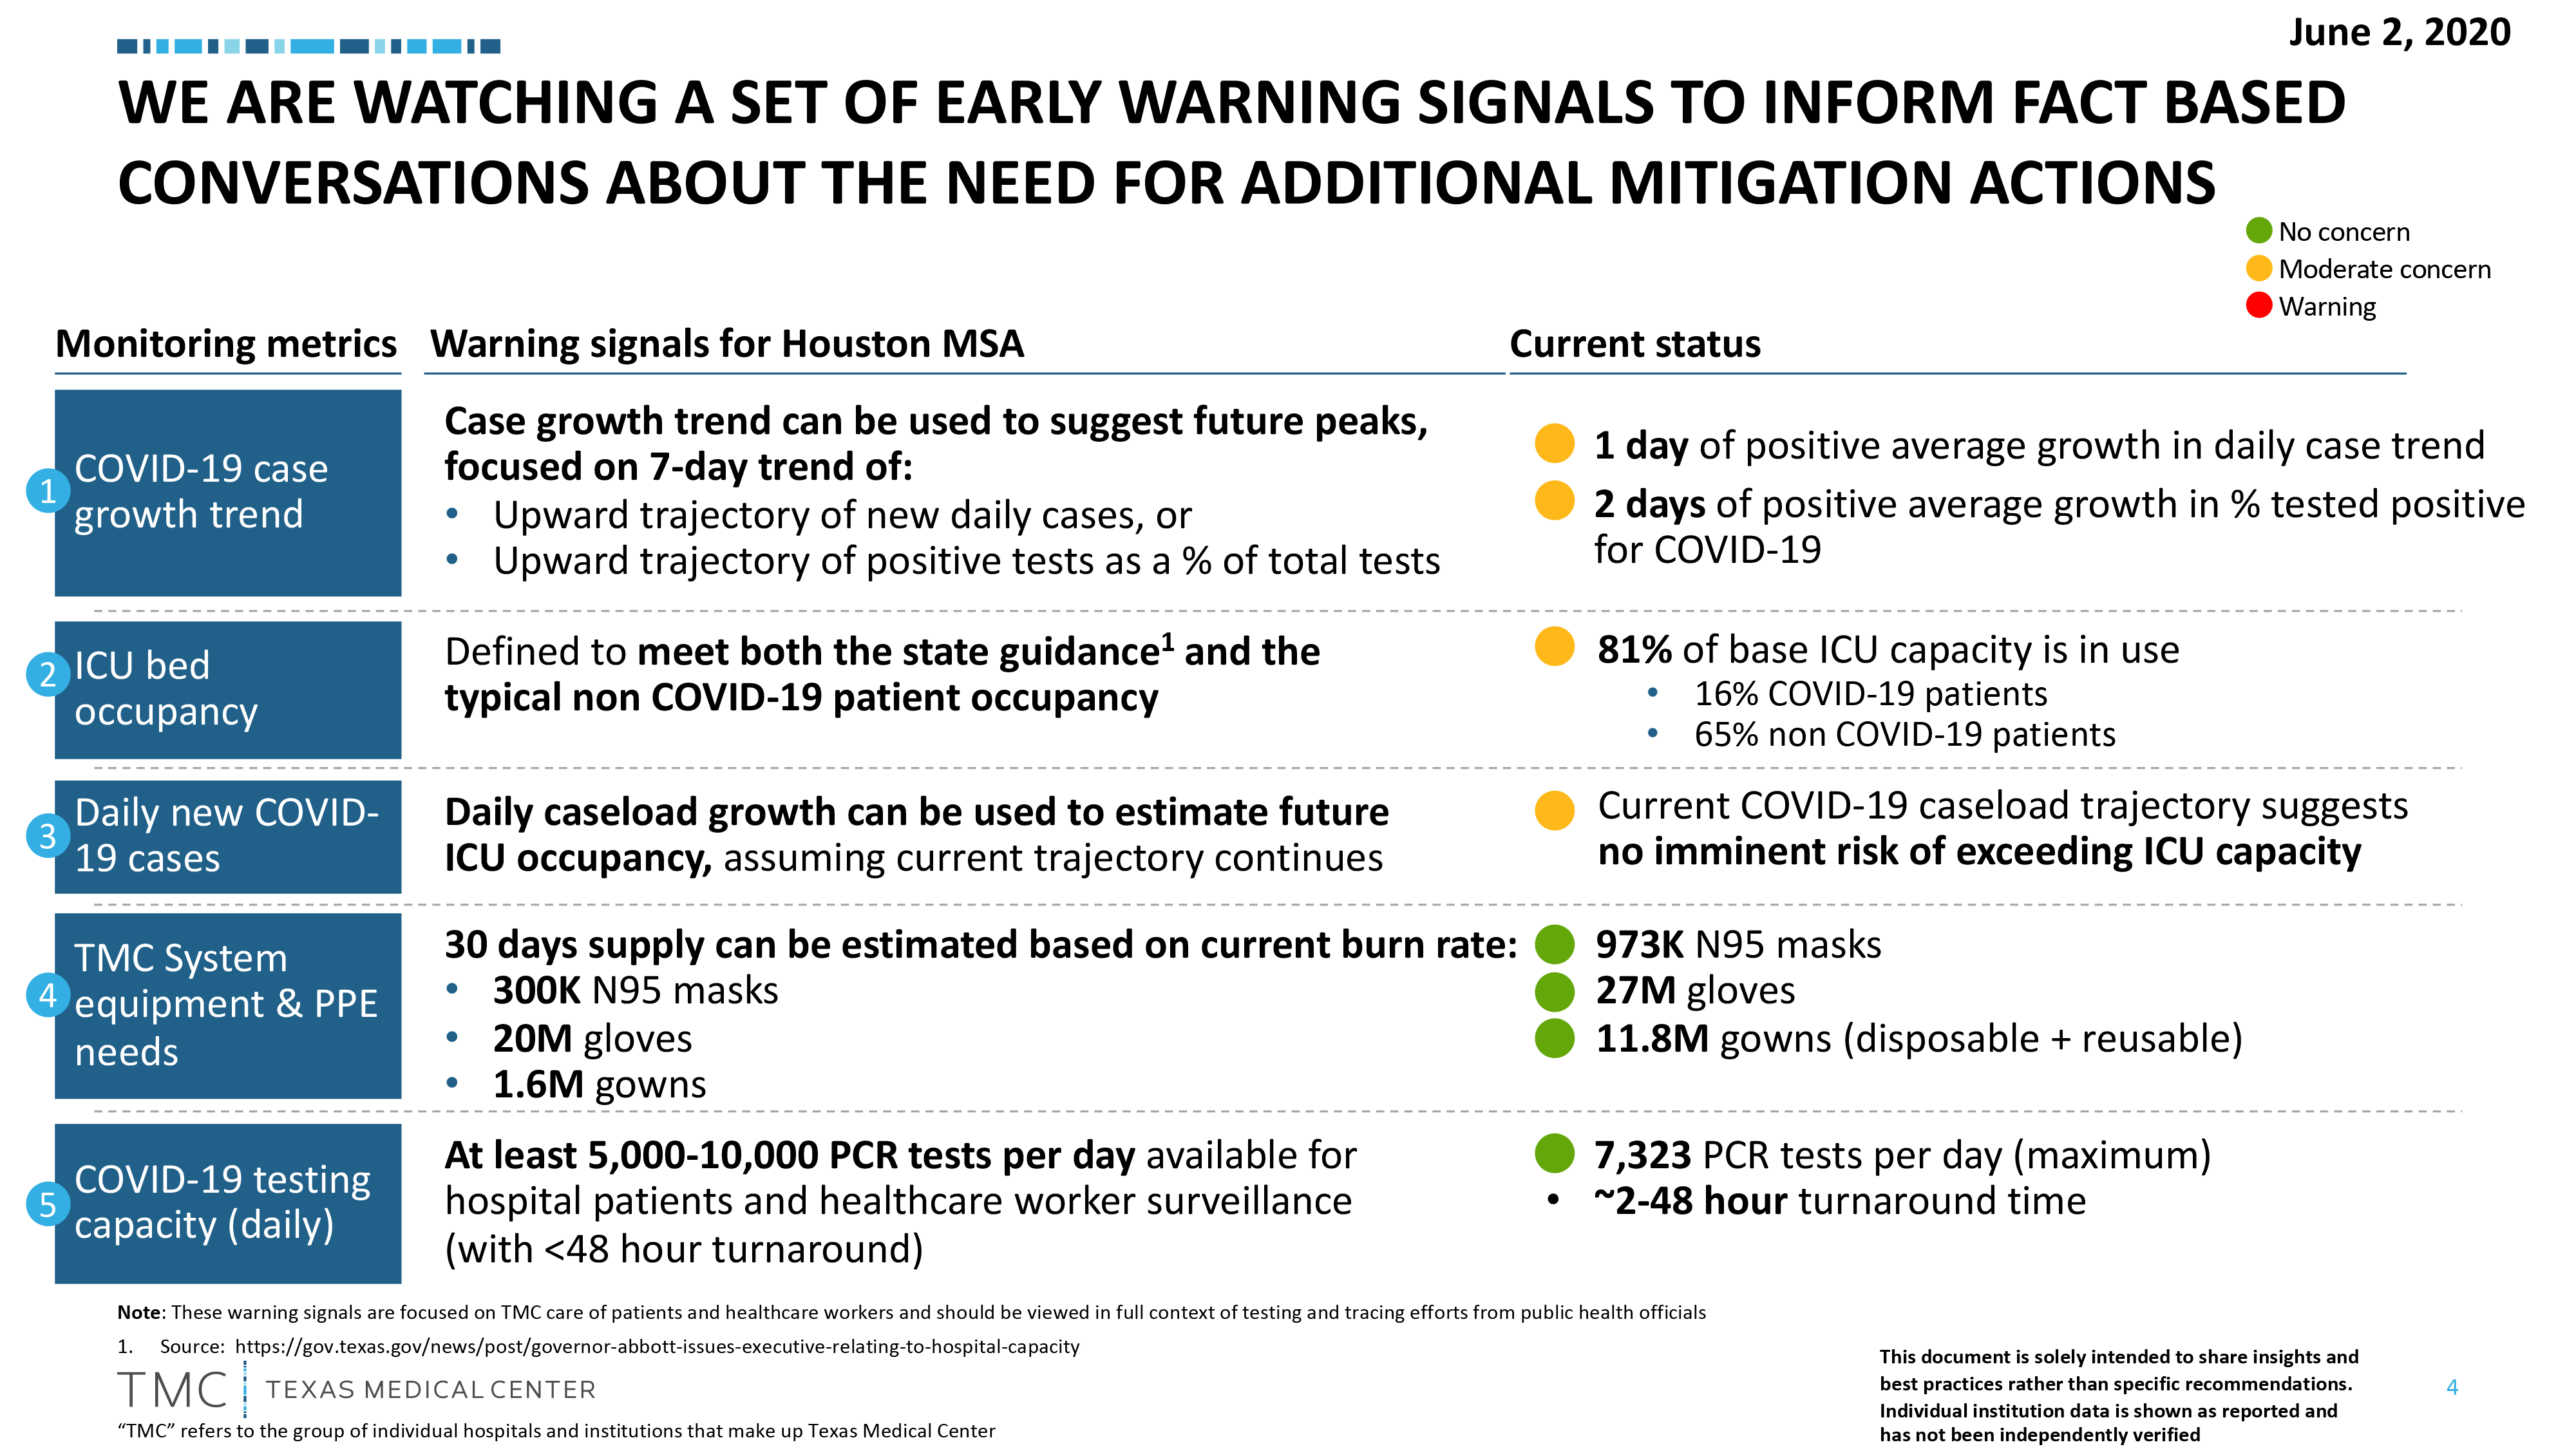 3-proposed-early-warning-monitoring-and-mitigation-metrics-6-3-2020.png